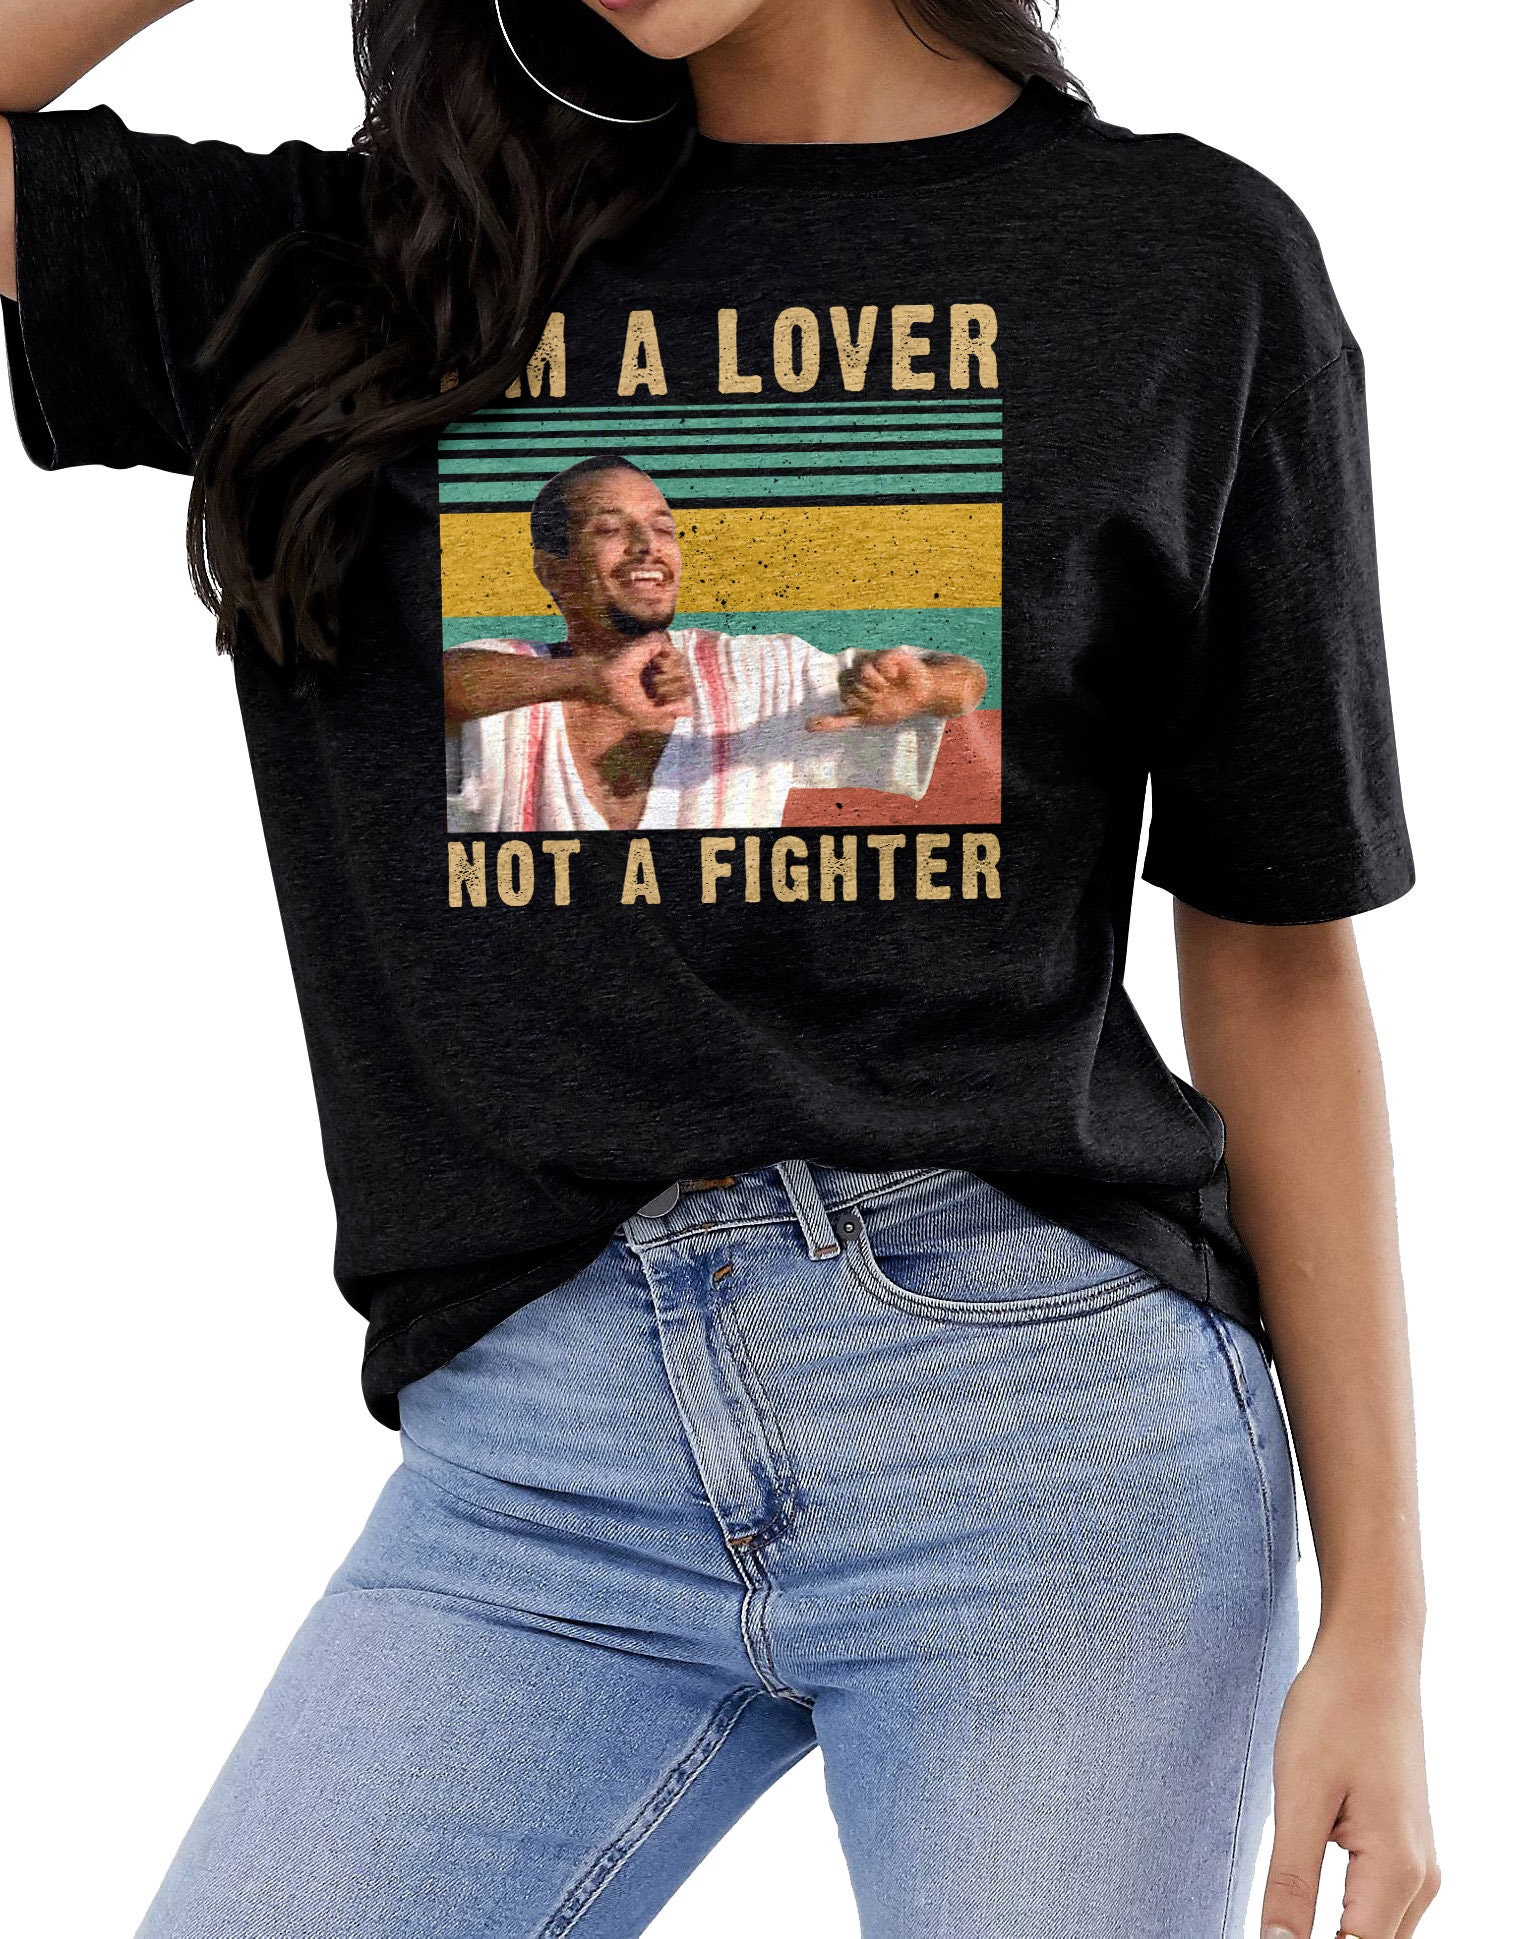 Blood In Blood Out Cruzito Im A Lover Not A Fighter Vintage T-Shirt sold by  Kierstengardenia, SKU 39376793